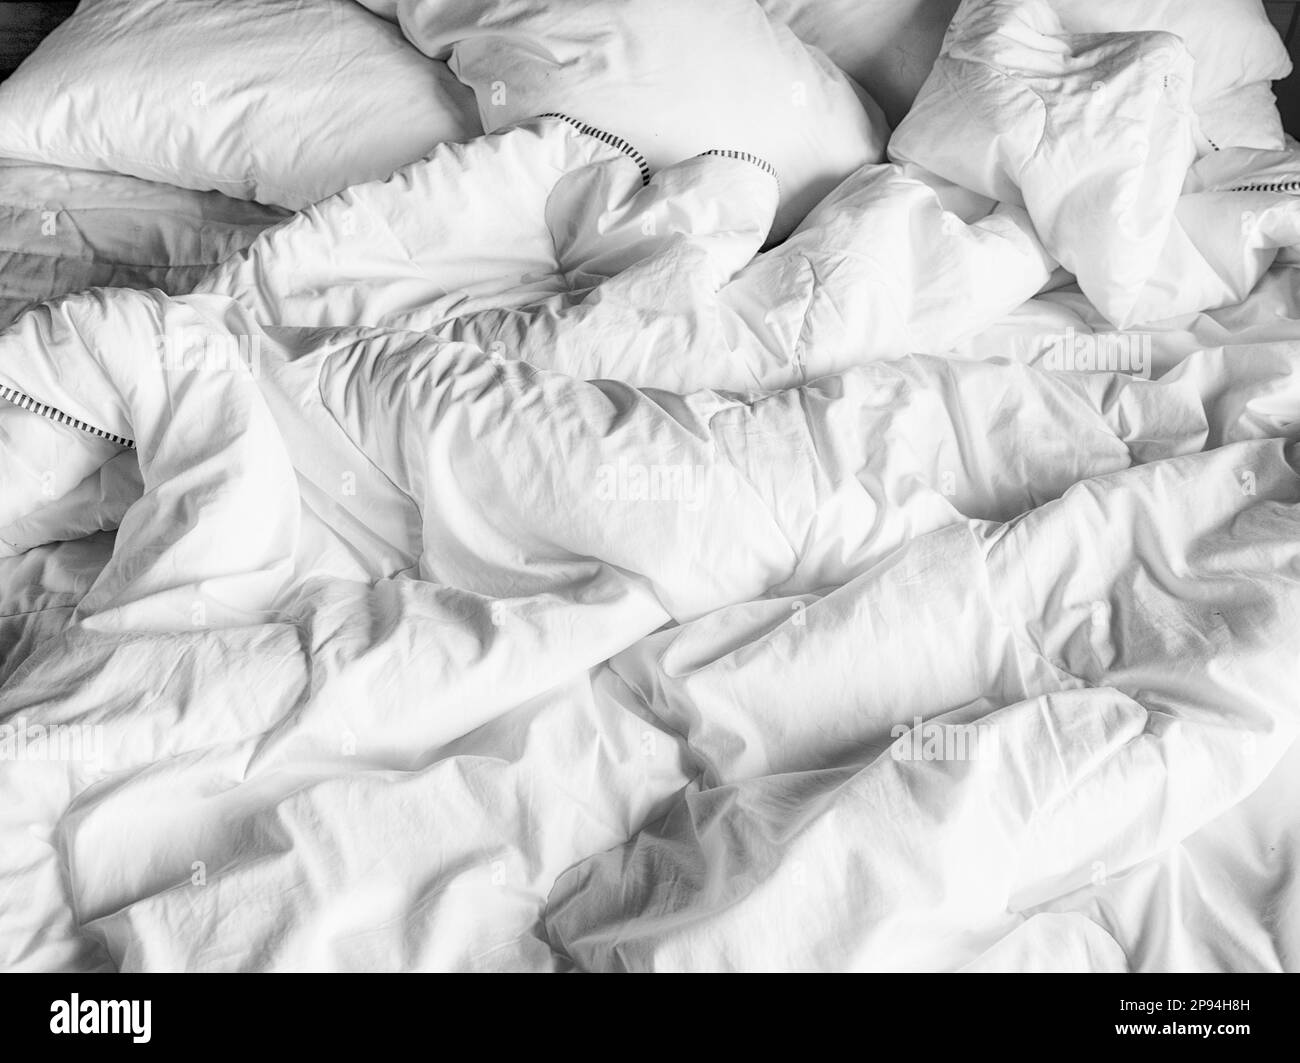 Domestic background of the rumpled duvet cover, white sheets and pillows on a bed. Stock Photo